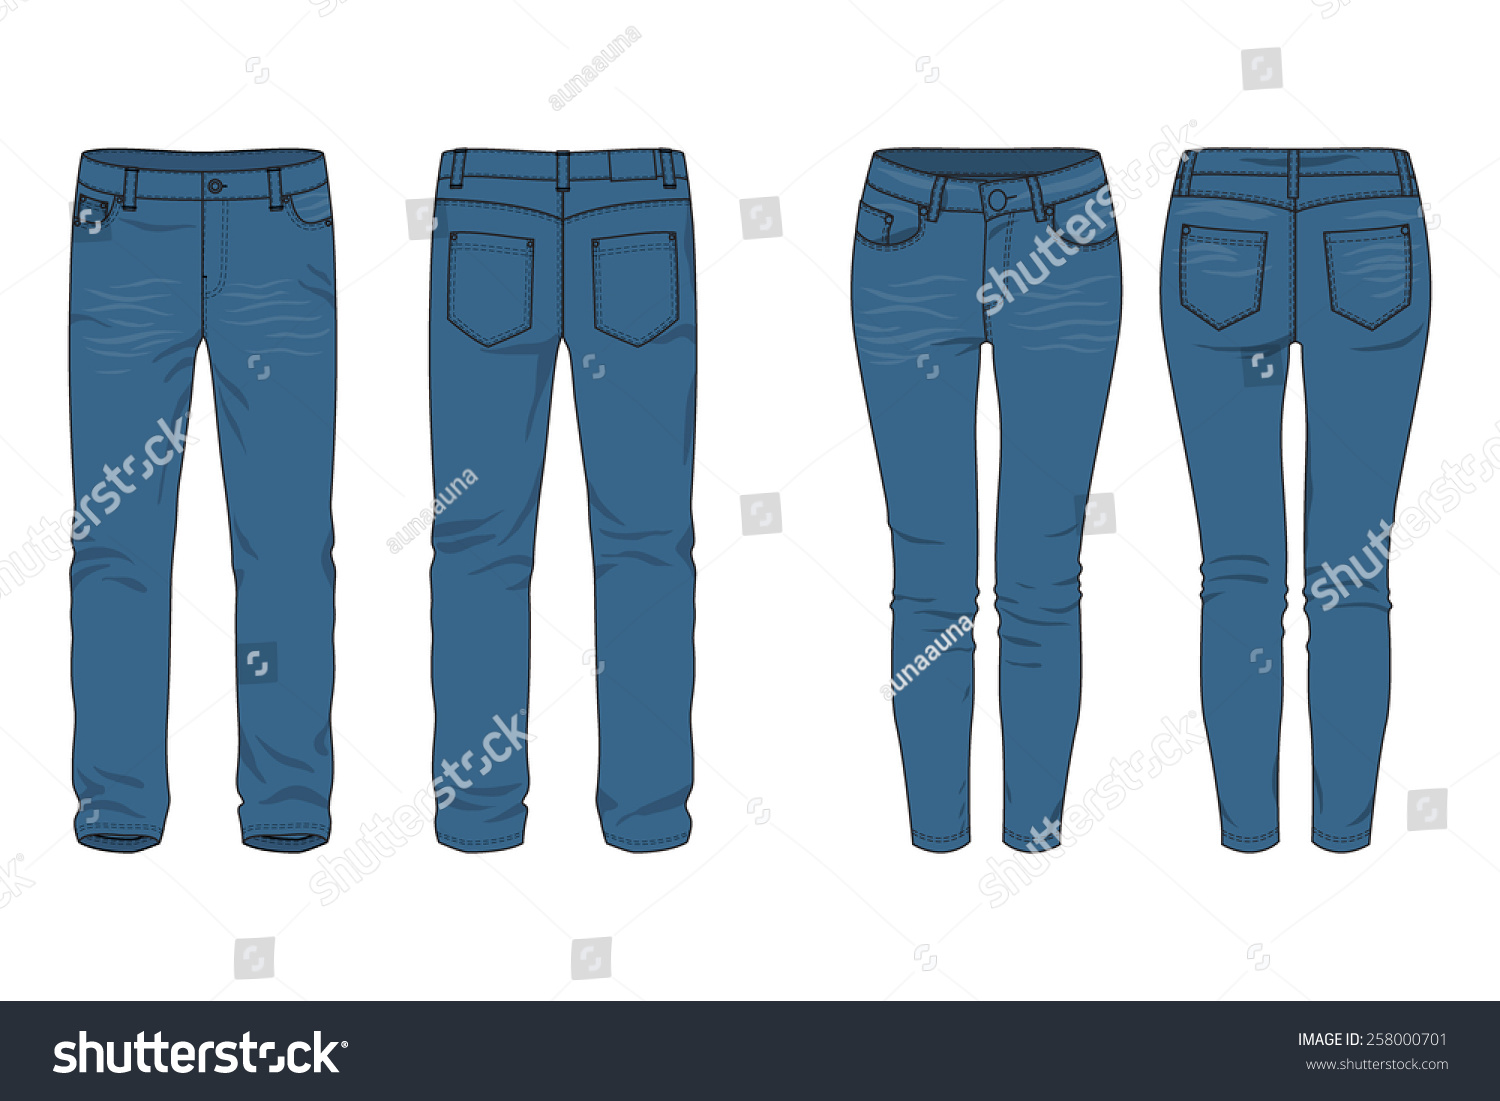 Blank Templates Of Men'S And Women'S Jeans In Front, Back And Side ...